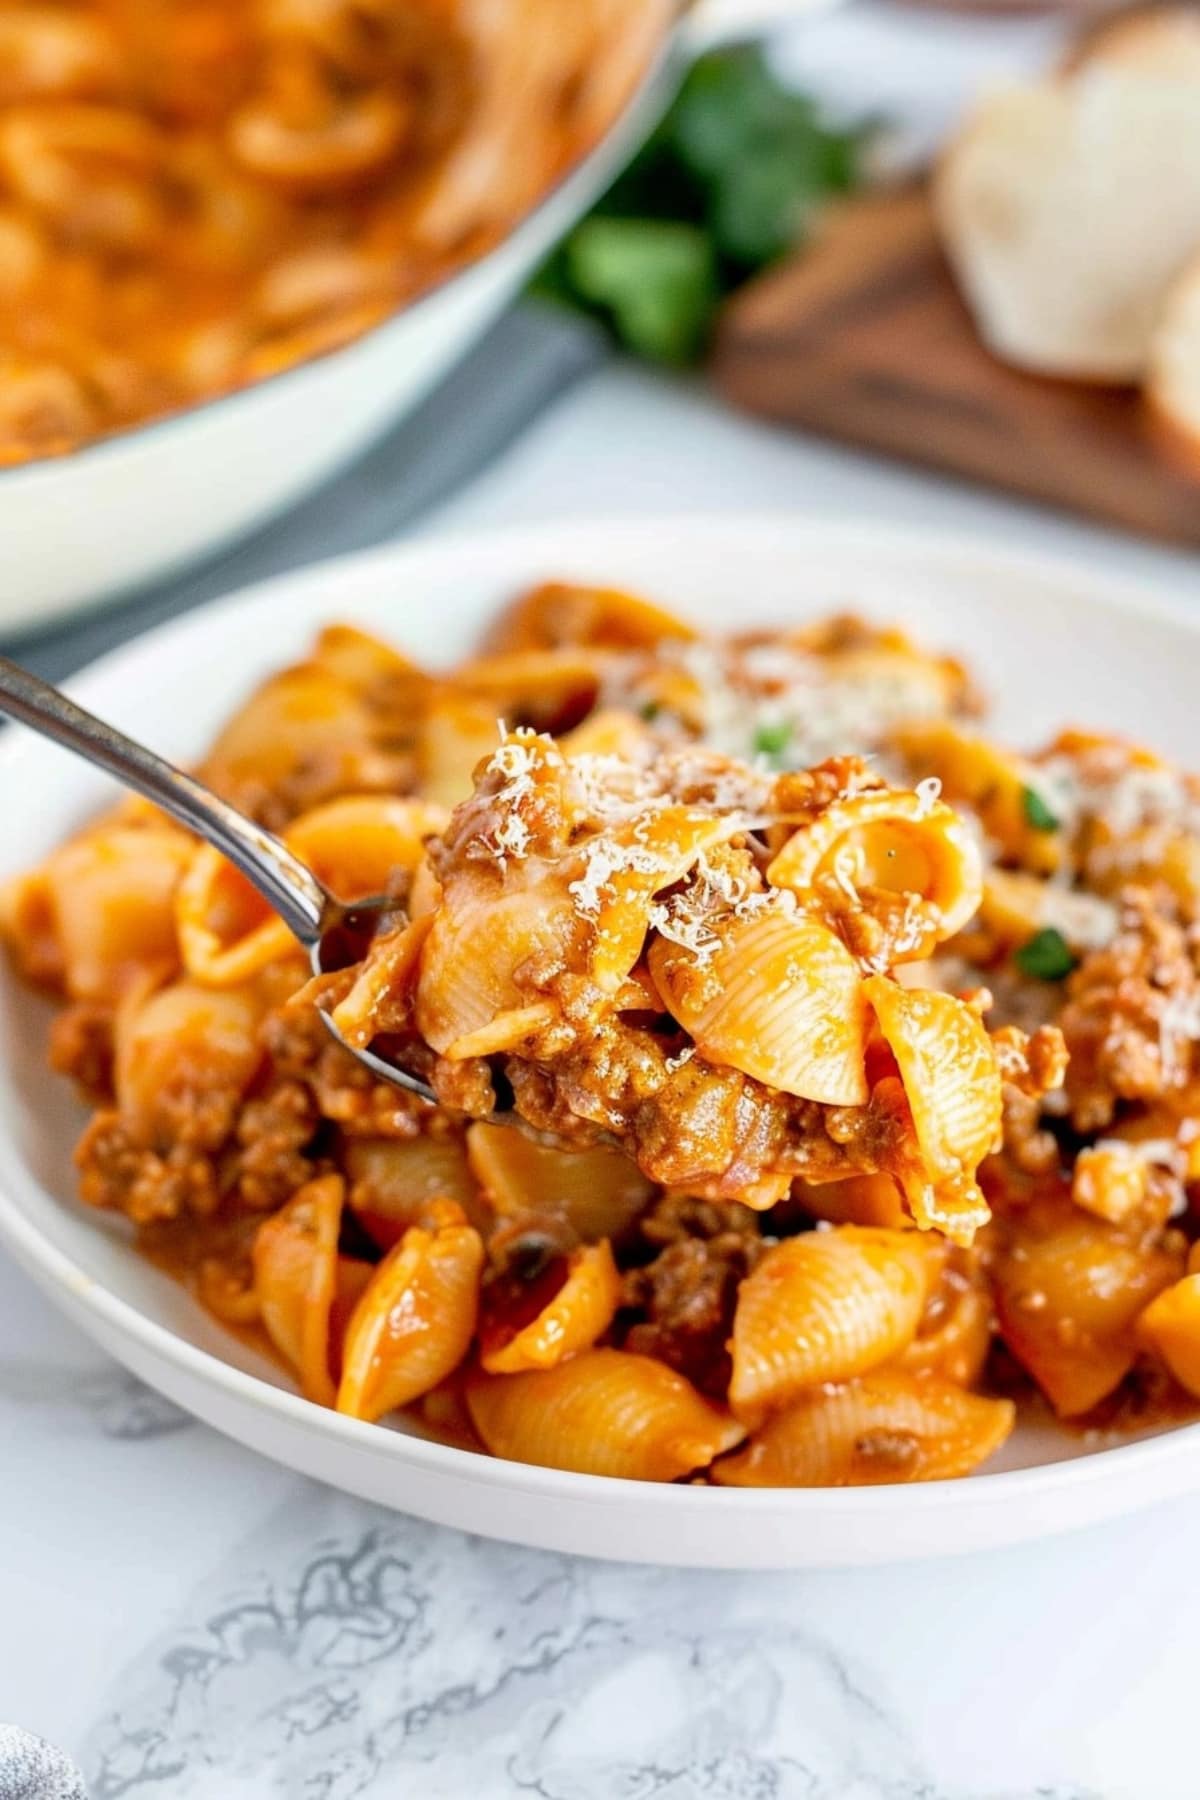 Spoon scooping beef and shells in cheesy tomato sauce with ground beef and cheese.